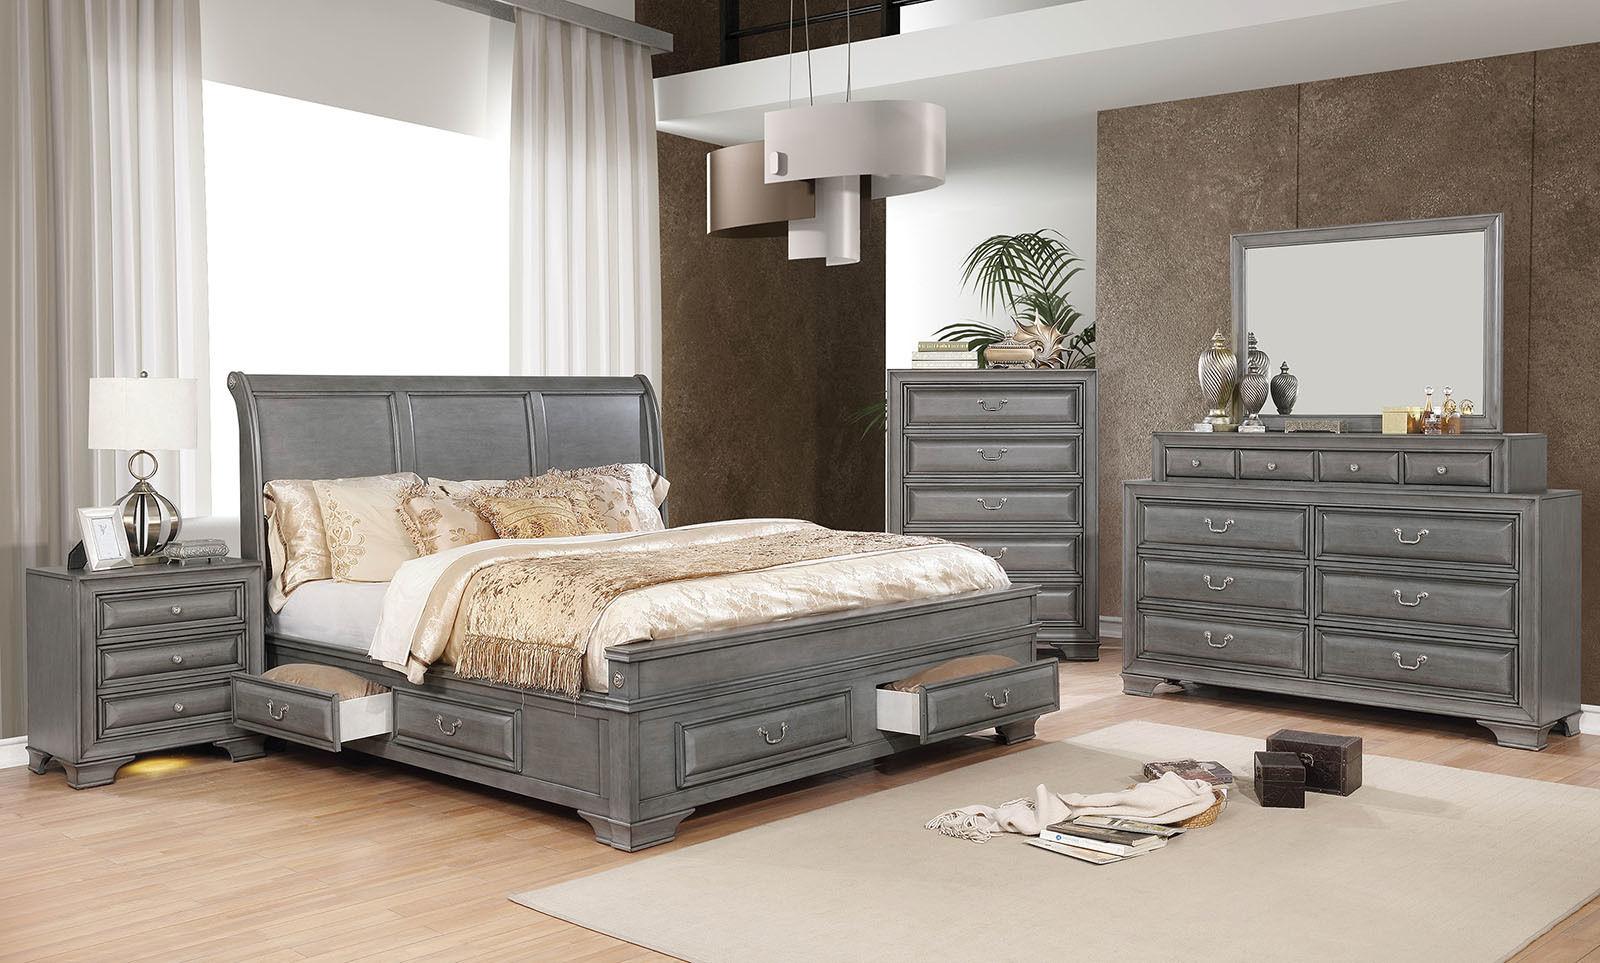 Transitional Storage Bedroom Set CM7302GY-CK-5PC Brandt CM7302GY-CK-5PC in Gray 